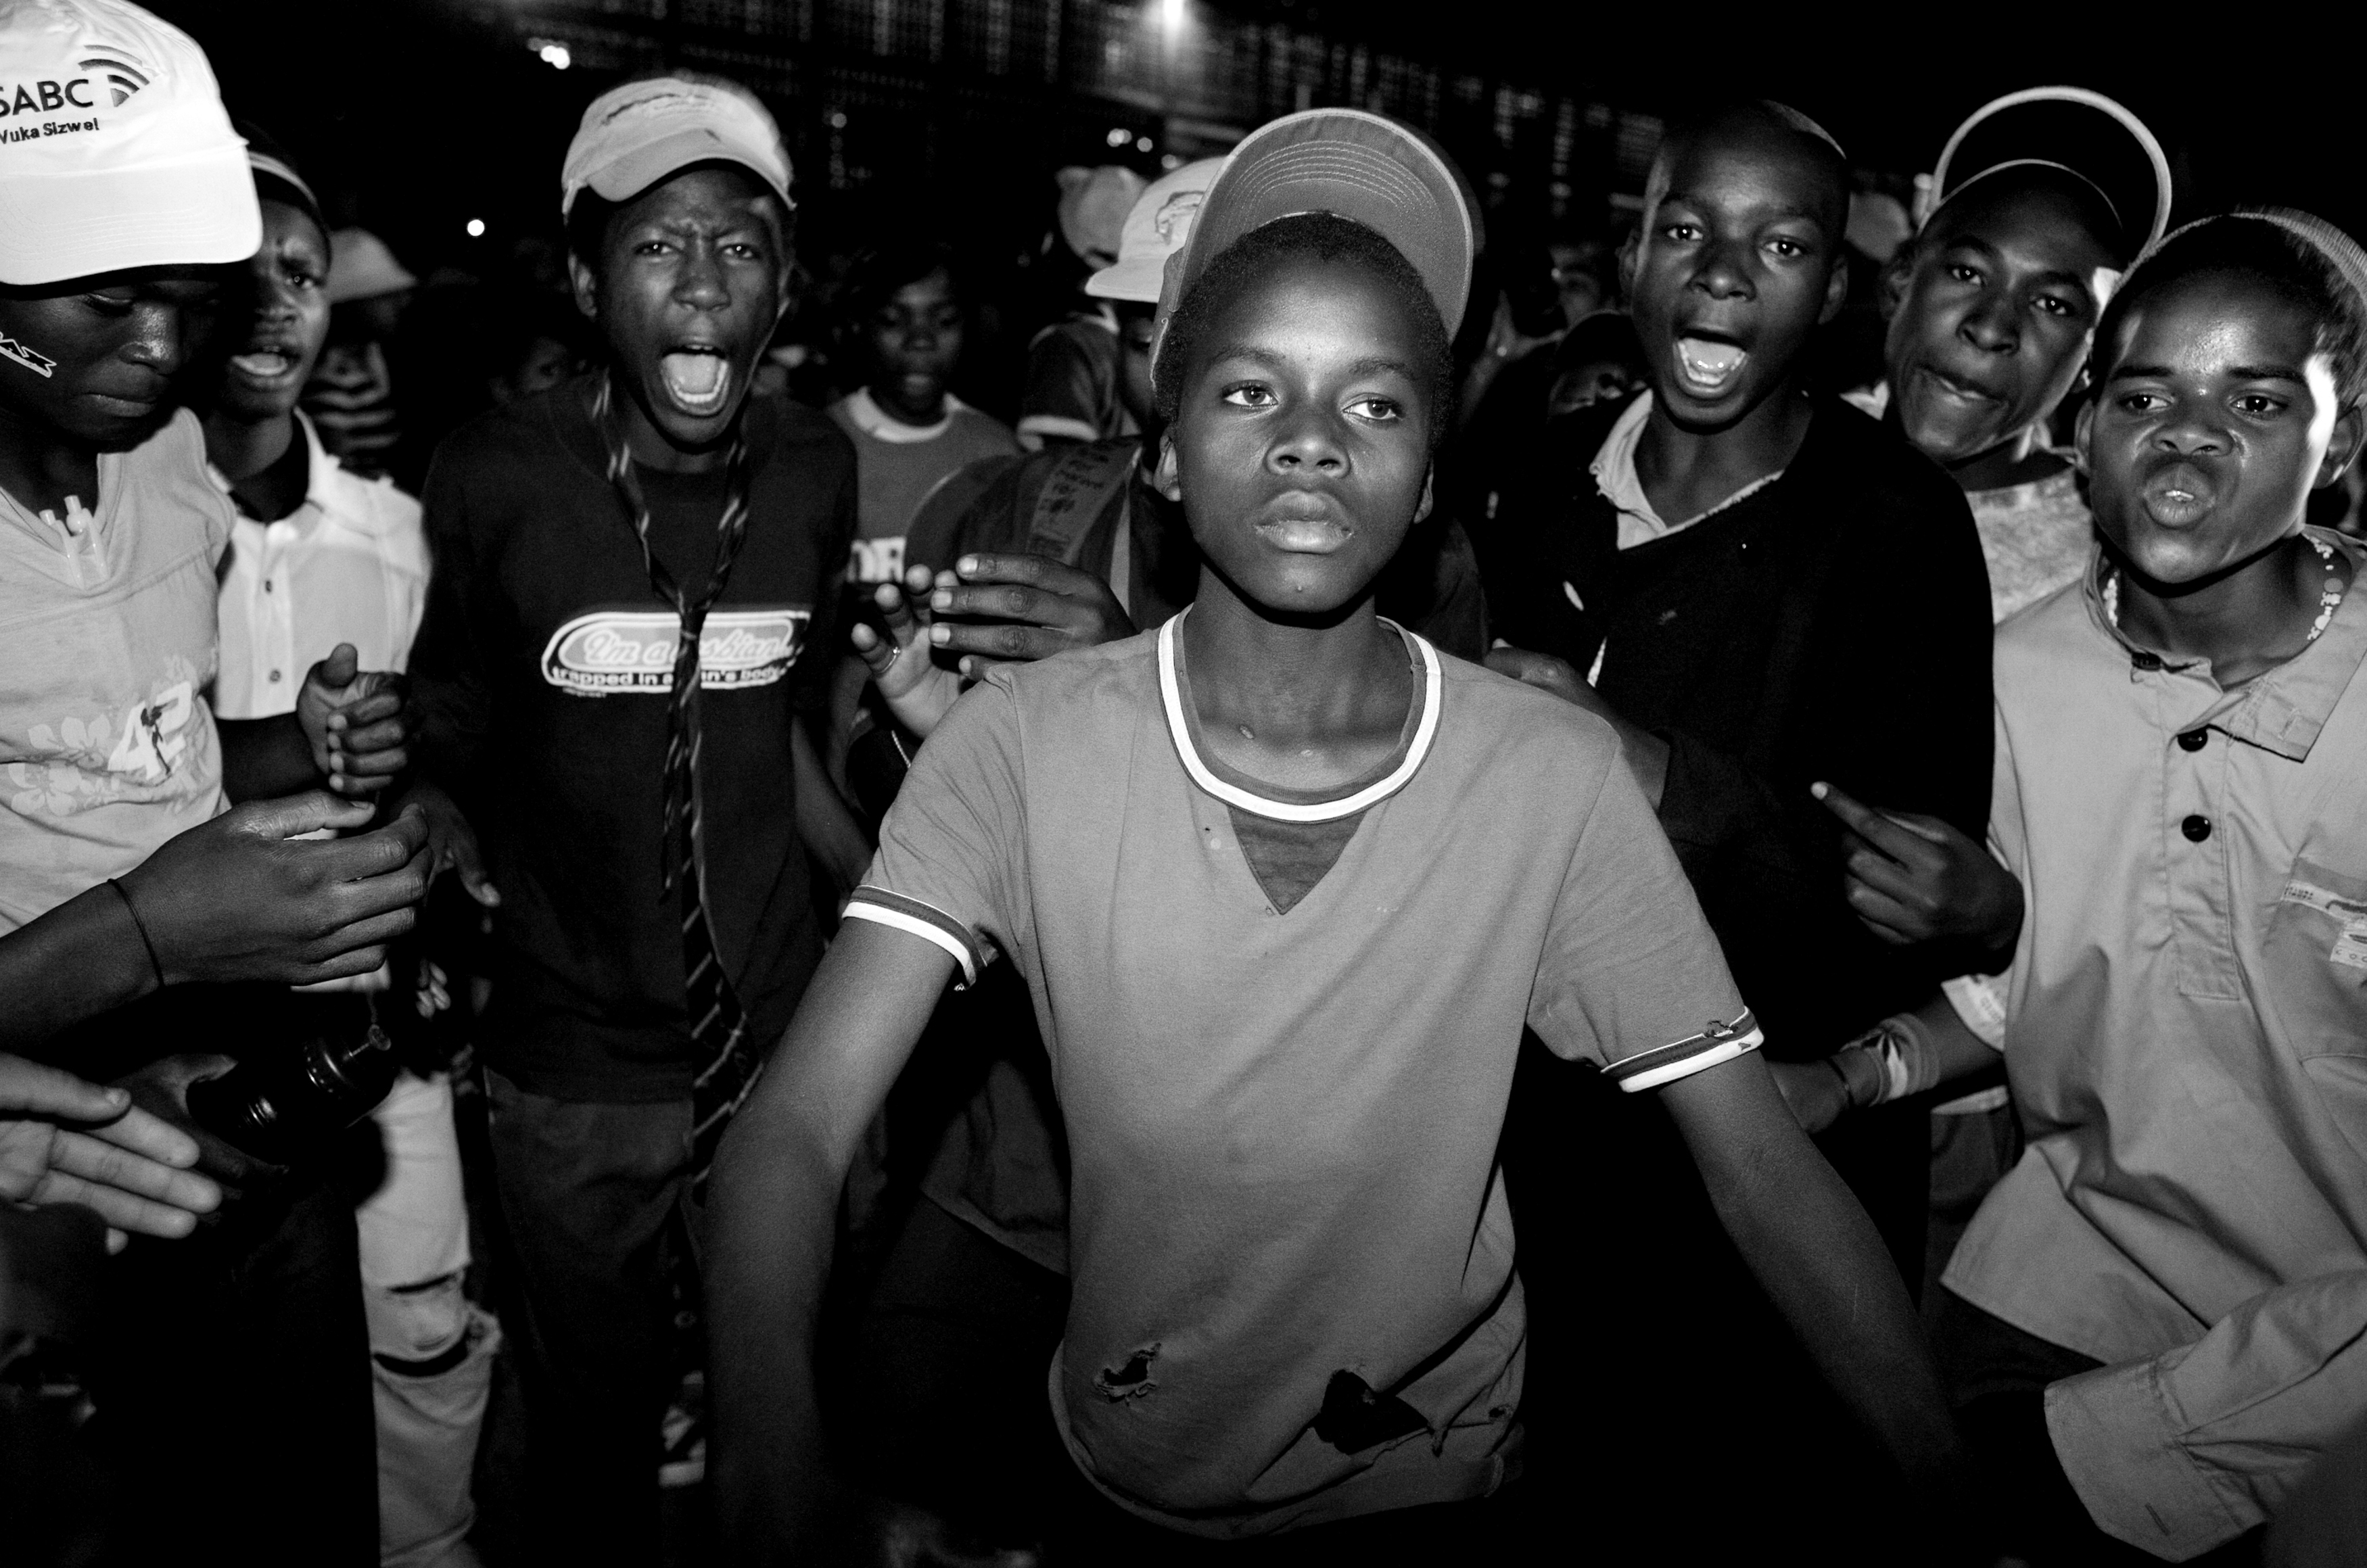 Kwaito Culture - Young kids dance to Kwaito music during the Soweto music festival in Johannesburg, South Africa. 2007 Kwaito, the musical genre emerging out of the South African townships at the end of apartheid, has traveled from homes, into the clubs, and out onto the streets, evolving into an urban culture that has swept the countries youth into communalized rebellion and self-expression through music and dance. Not unlike early blues and hip-hop in the US, Kwaito tells stories - of life impoverished, but also of being young and sexual and free. This work looks at Kwaito culture in the South African townships of Johannesburg.